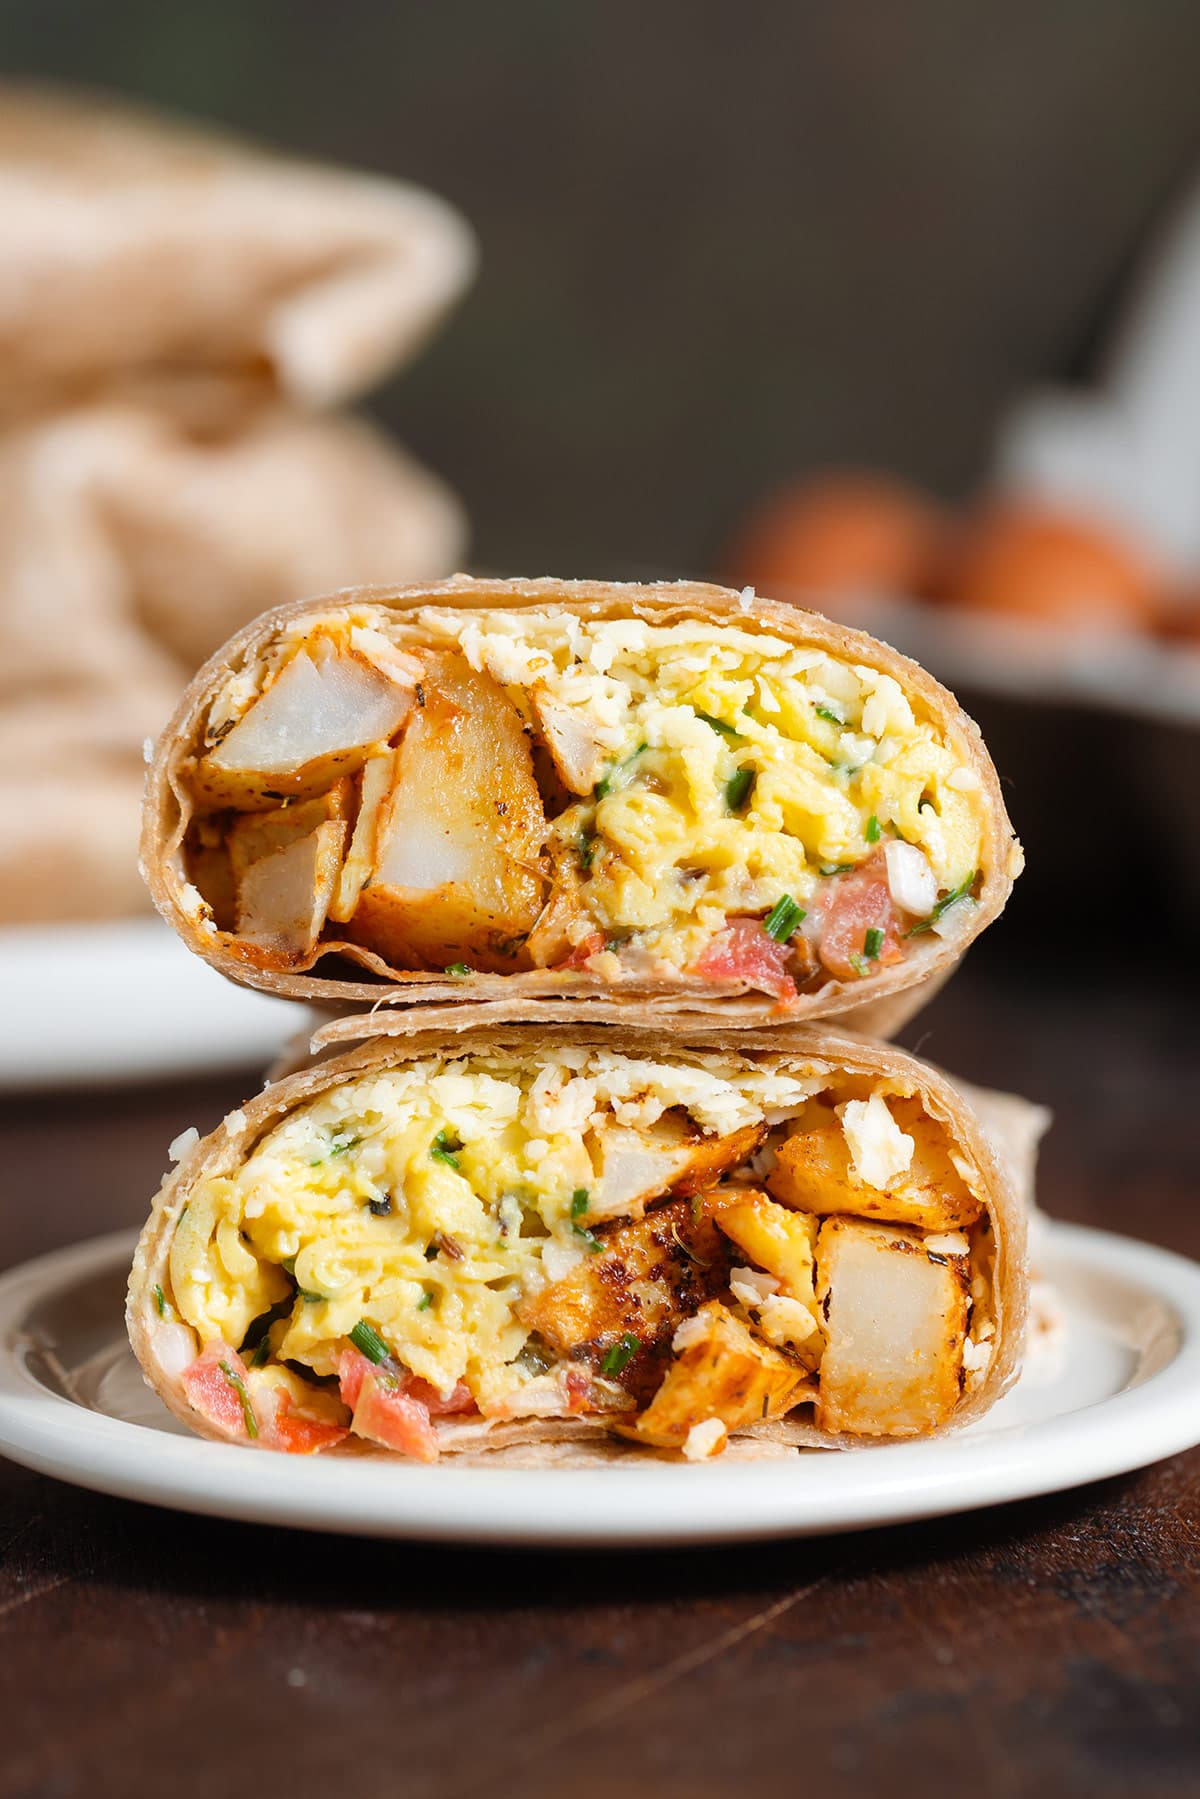 A breakfast burrito cut in half on a small white plate on a wooden background with more burritos and eggs in the background.